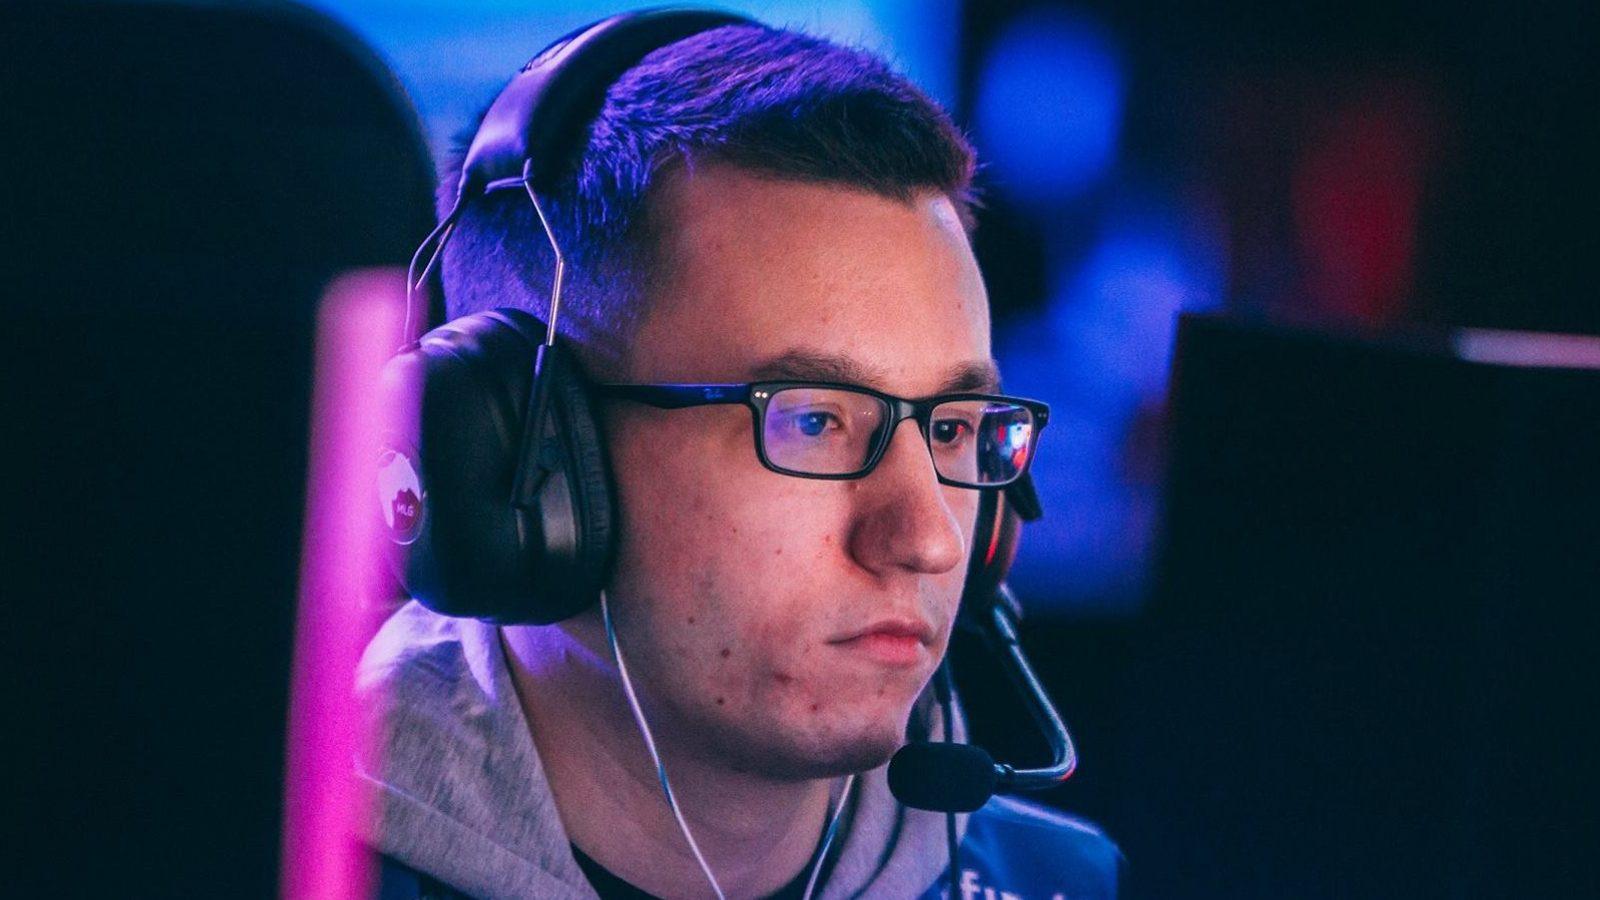 Aches competing in Call of Duty.